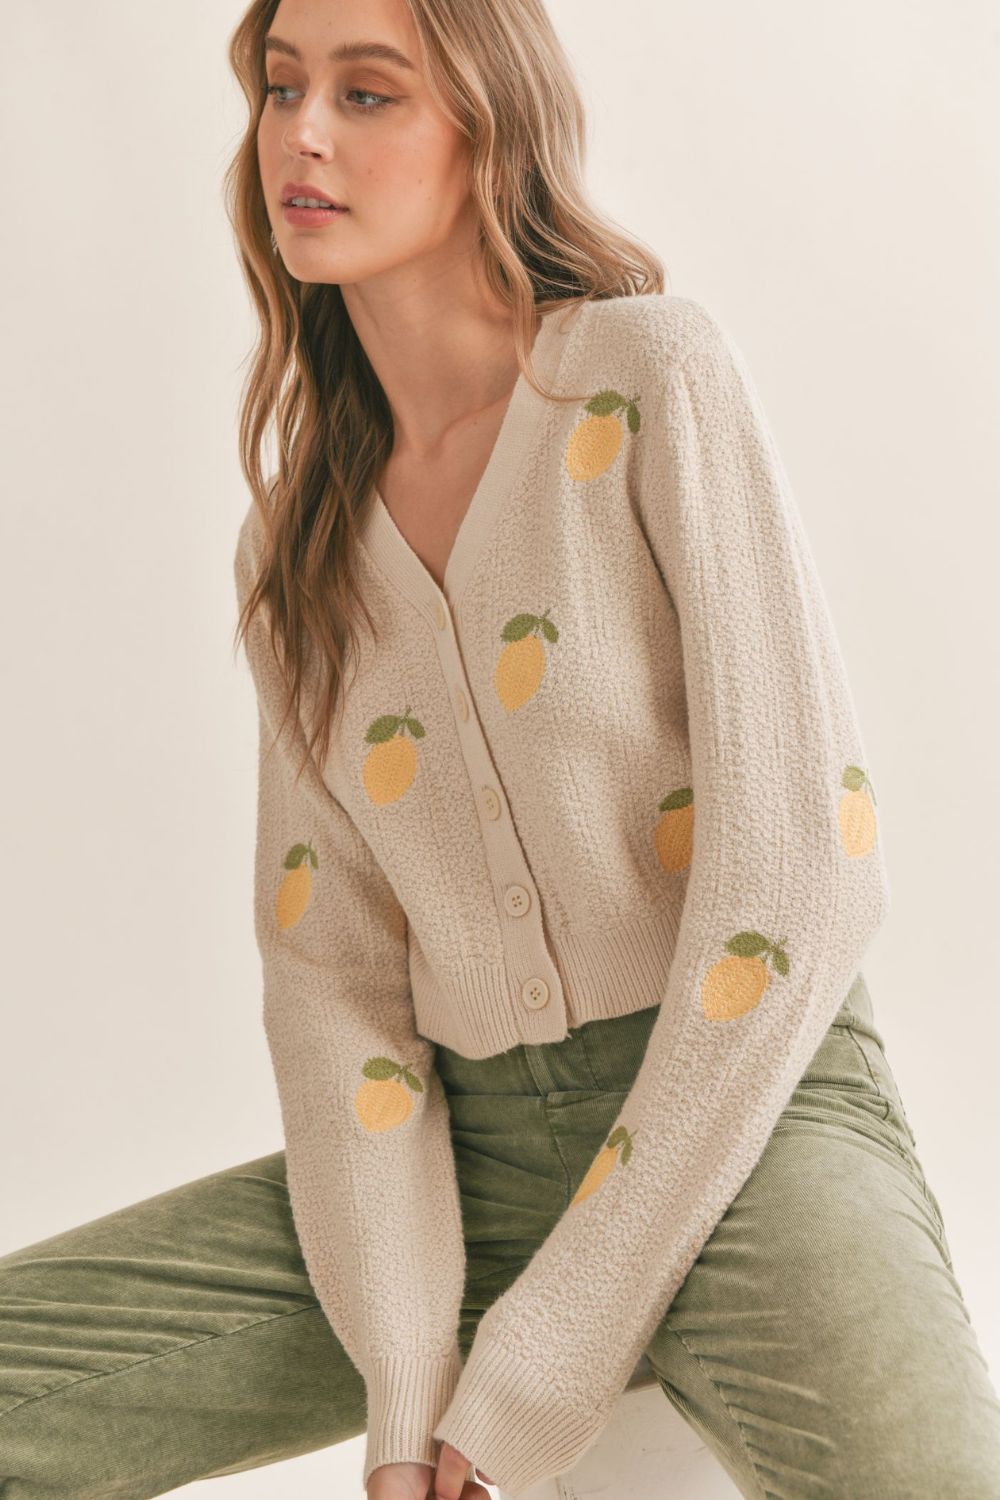 Women's Embroidered Lemon Cardigan | Light Beige - Women's Sweaters - Blooming Daily